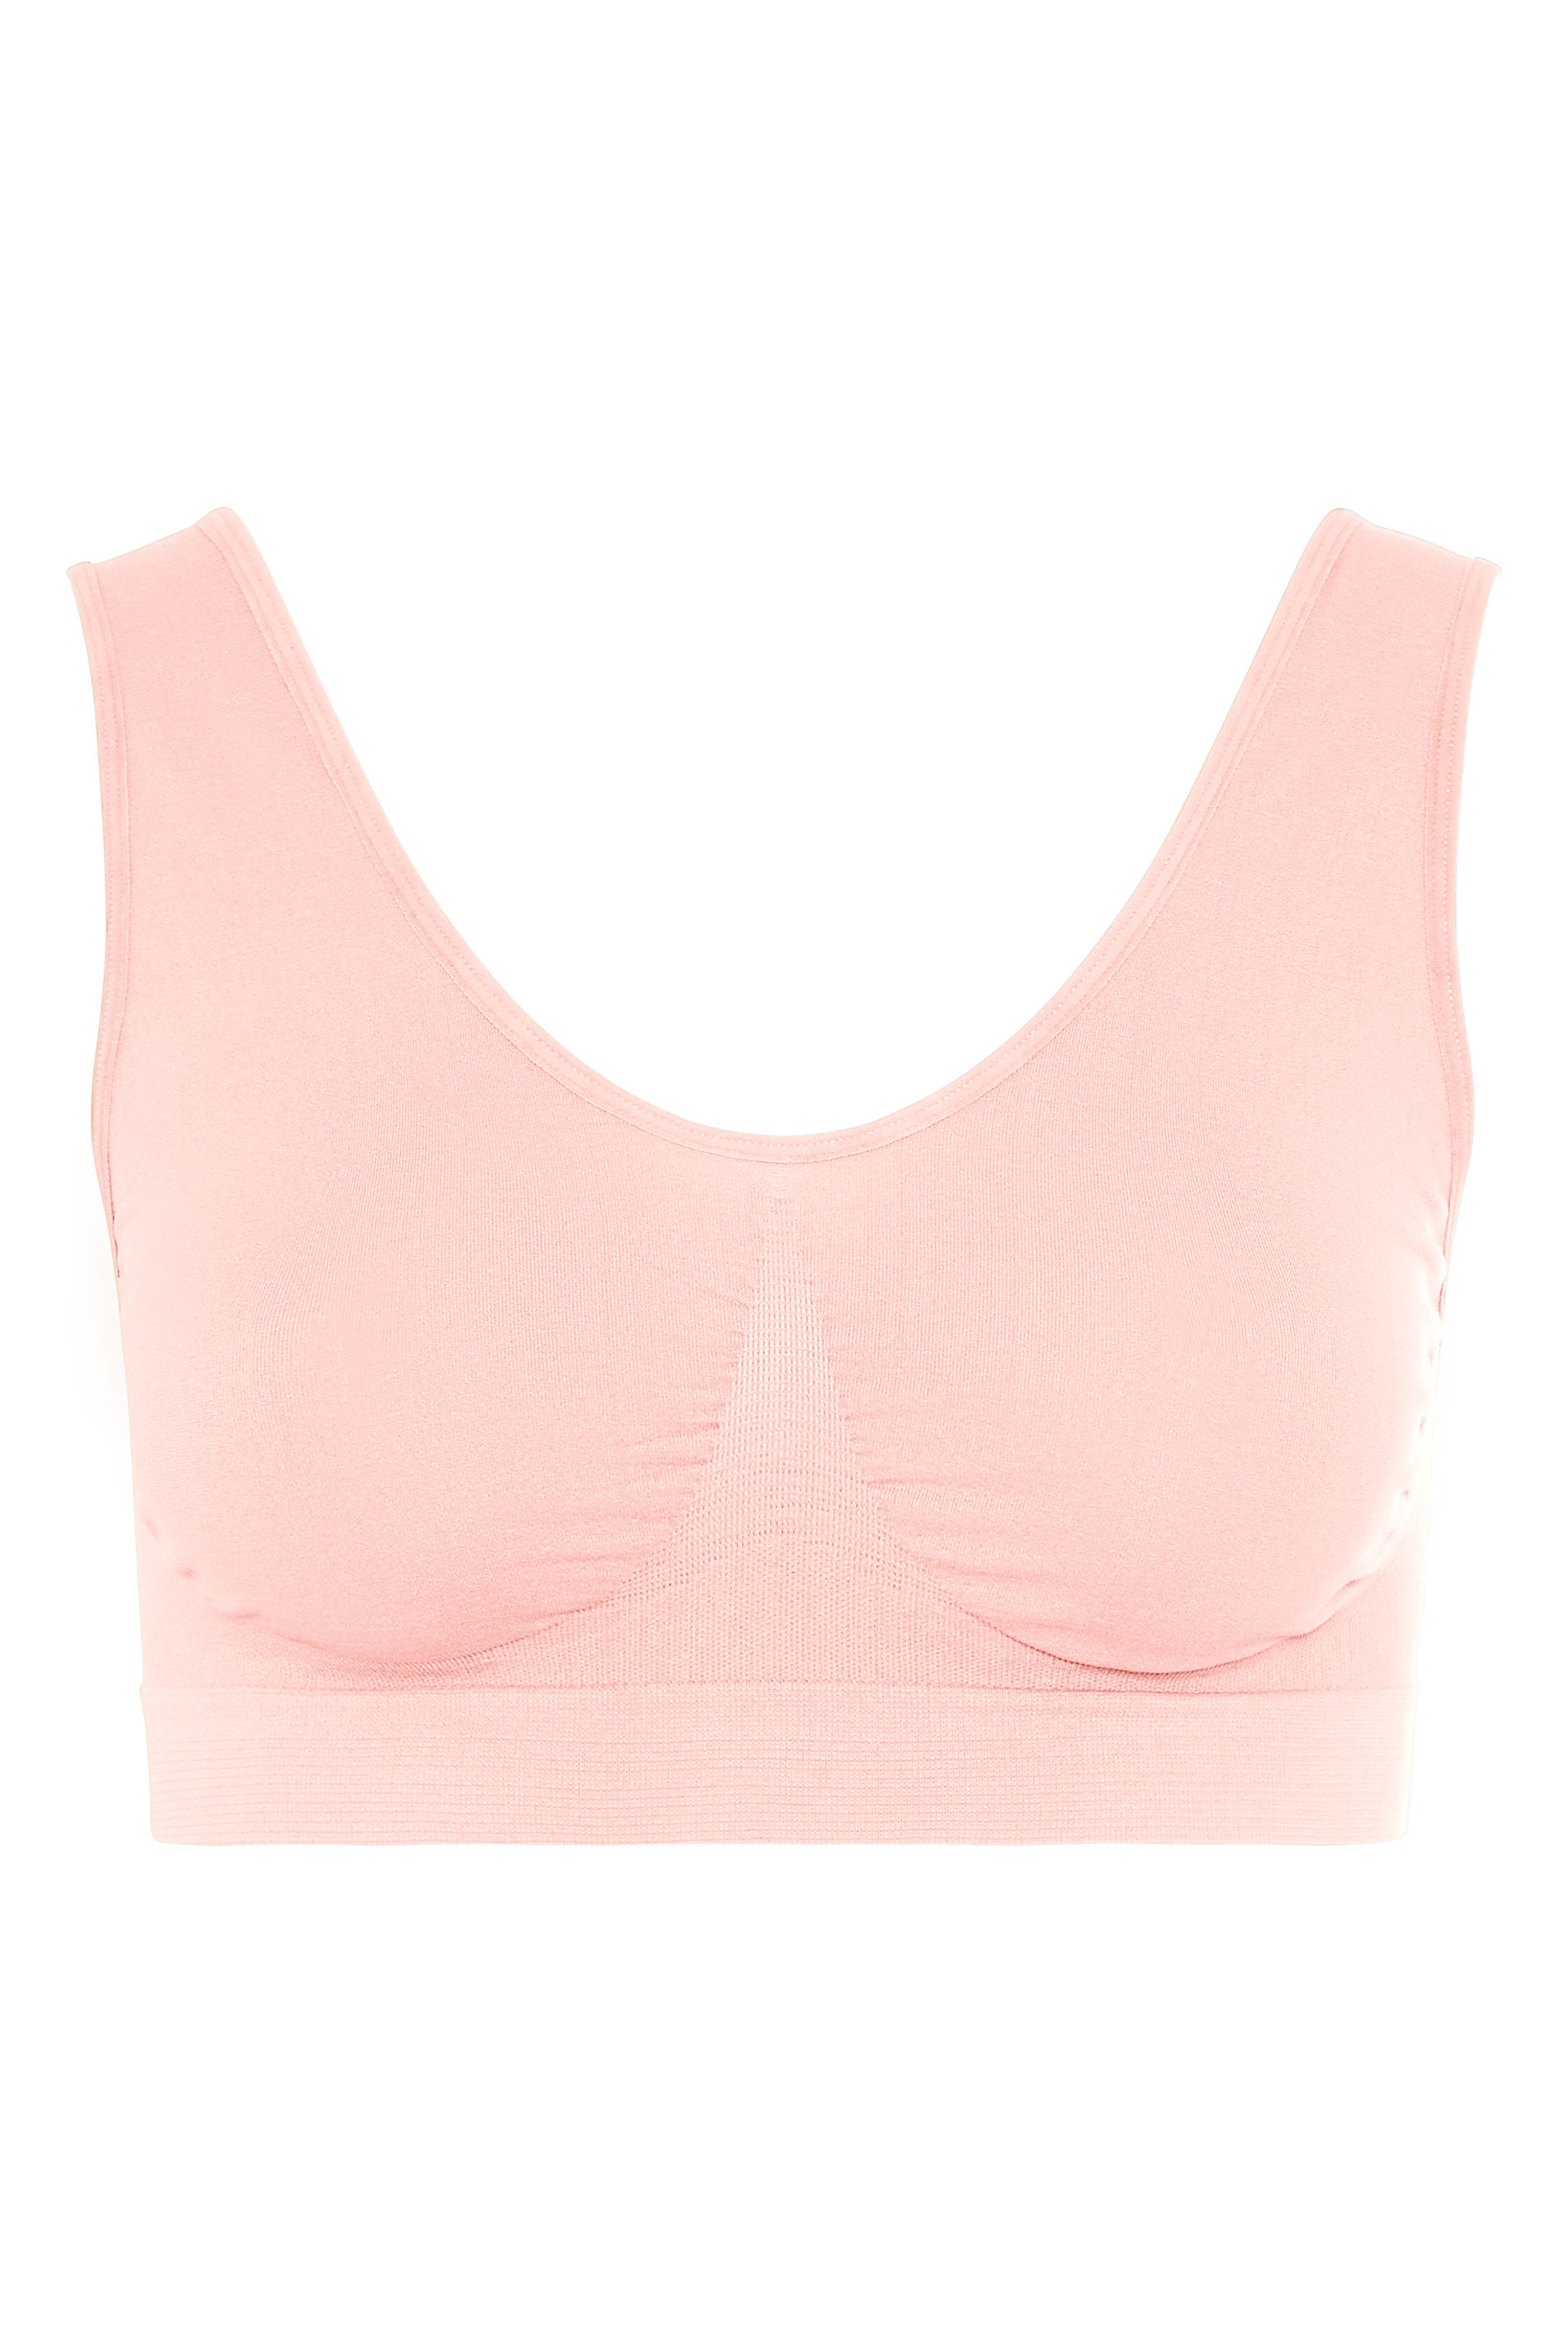 Plus Size Pink Seamless Padded Non-Wired Bralette | Yours Clothing 3